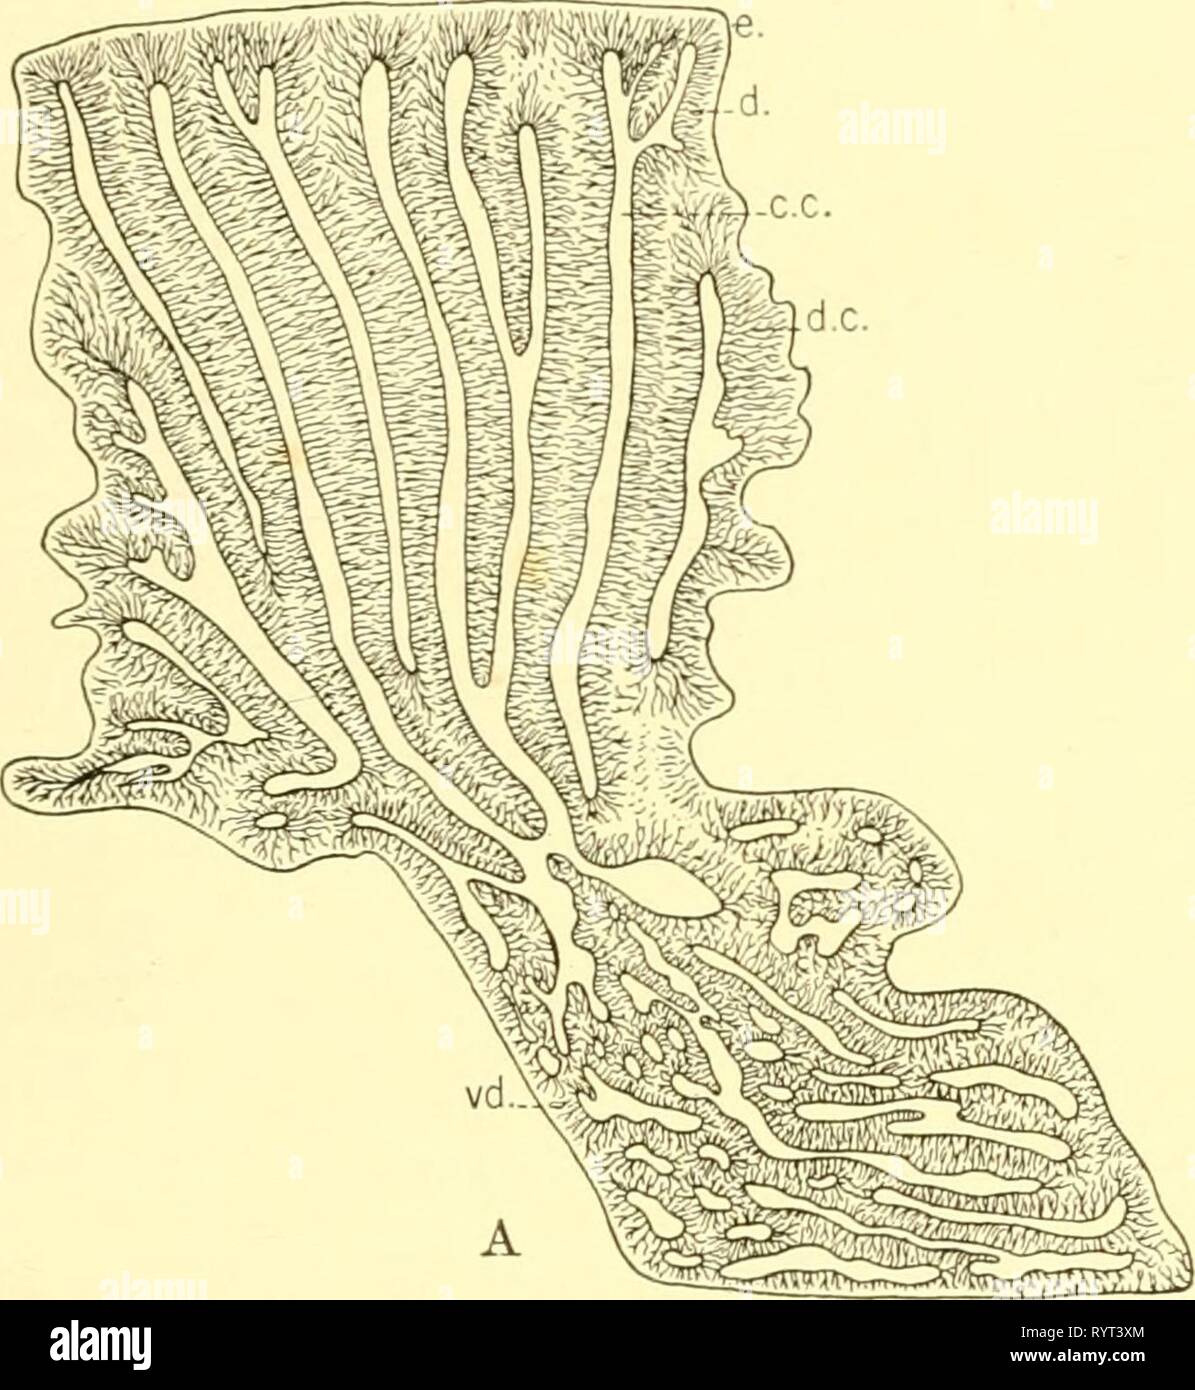 The elasmobranch fishes (1934) The elasmobranch fishes . elasmobranchfish03dani Year: 1934  THE ELASMOBRANCH PISHES 131 tubes end in enlarged islands continuous with the enamel (Galeus). In others the tubules ])enetrate far outward into the enamel and either divide into branches {Carcharias) or are lost as fine single tubules (Lamna). EEPLACEMENT OF TEETH Teeth which have been injured or lost are replaced by new ones. To gain a notion of the provision made for repairing injury or loss it is only necessary to examine the mouth of a form like Carcharias, or Heterdontus (fig. 128). In Stock Photo